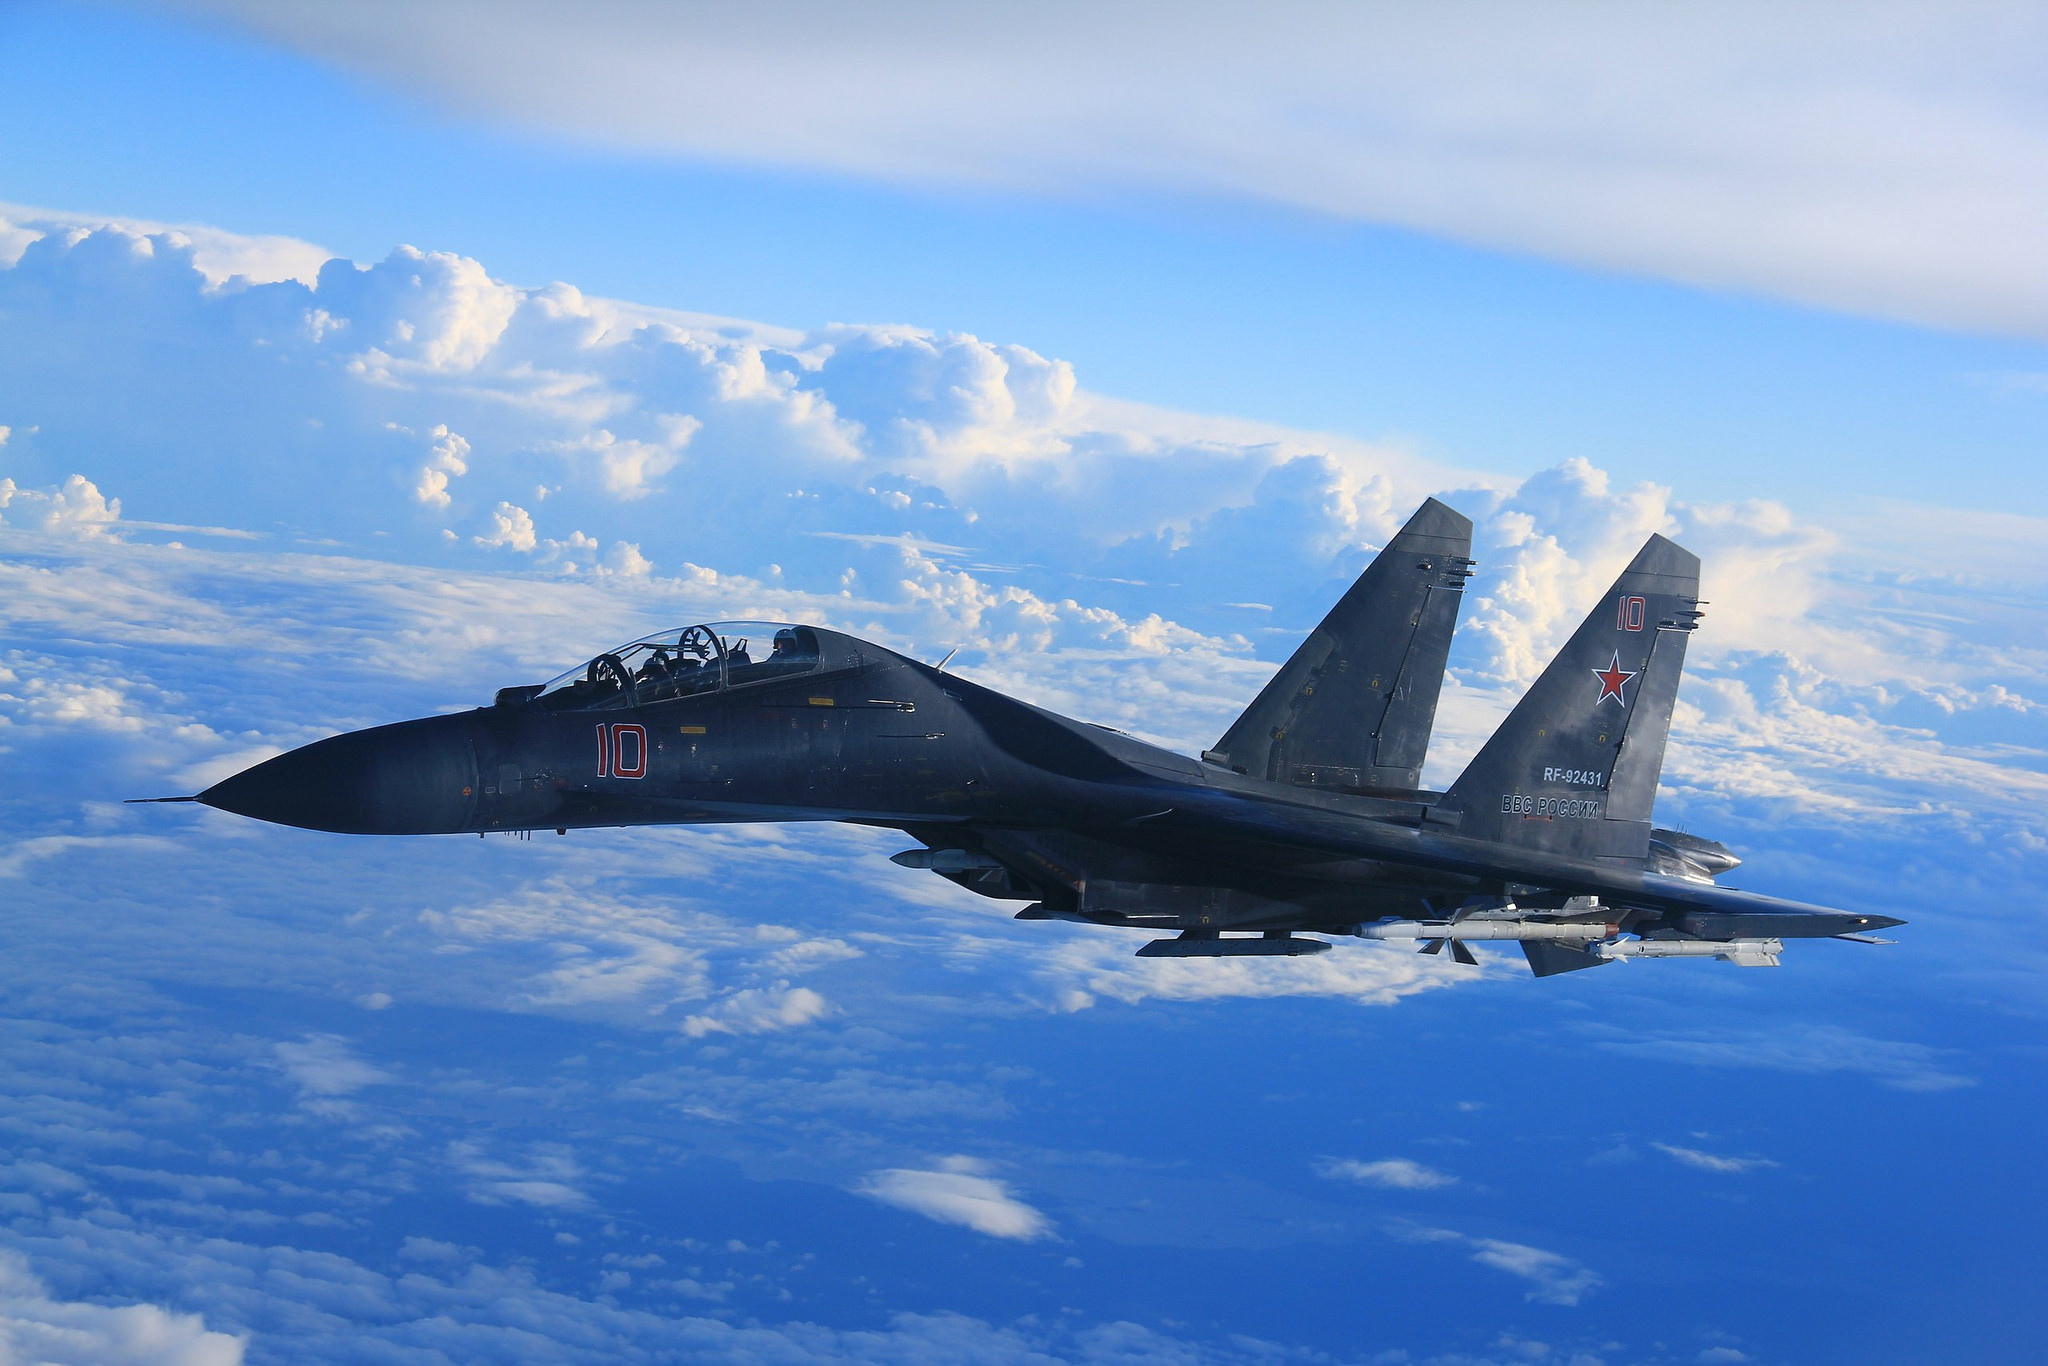 sukhoi su 35, military, air force, aircraft, jet fighters